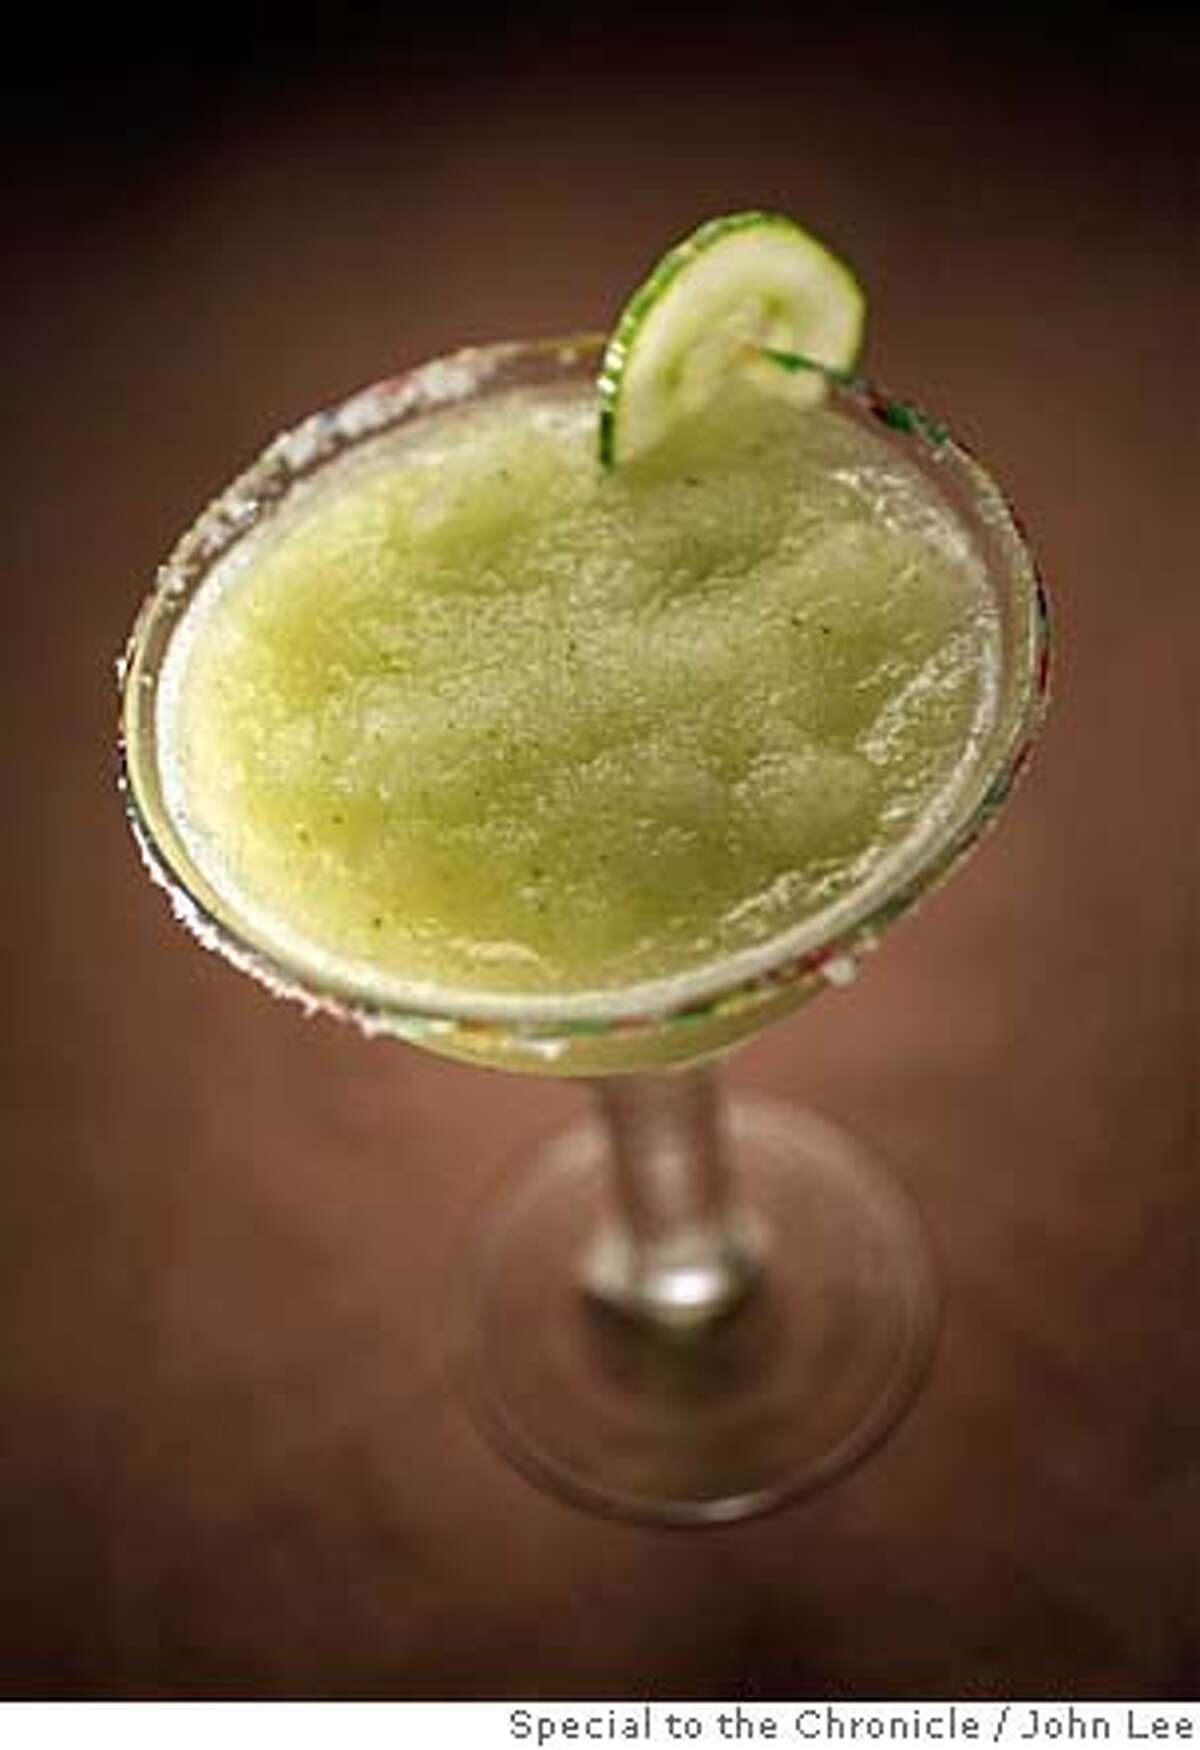 SPIRITS14_JOHNLEE.JPG Cucumber cocktail. PHOTO BY JOHN LEE/SPECIAL TO THE CHRONICLE